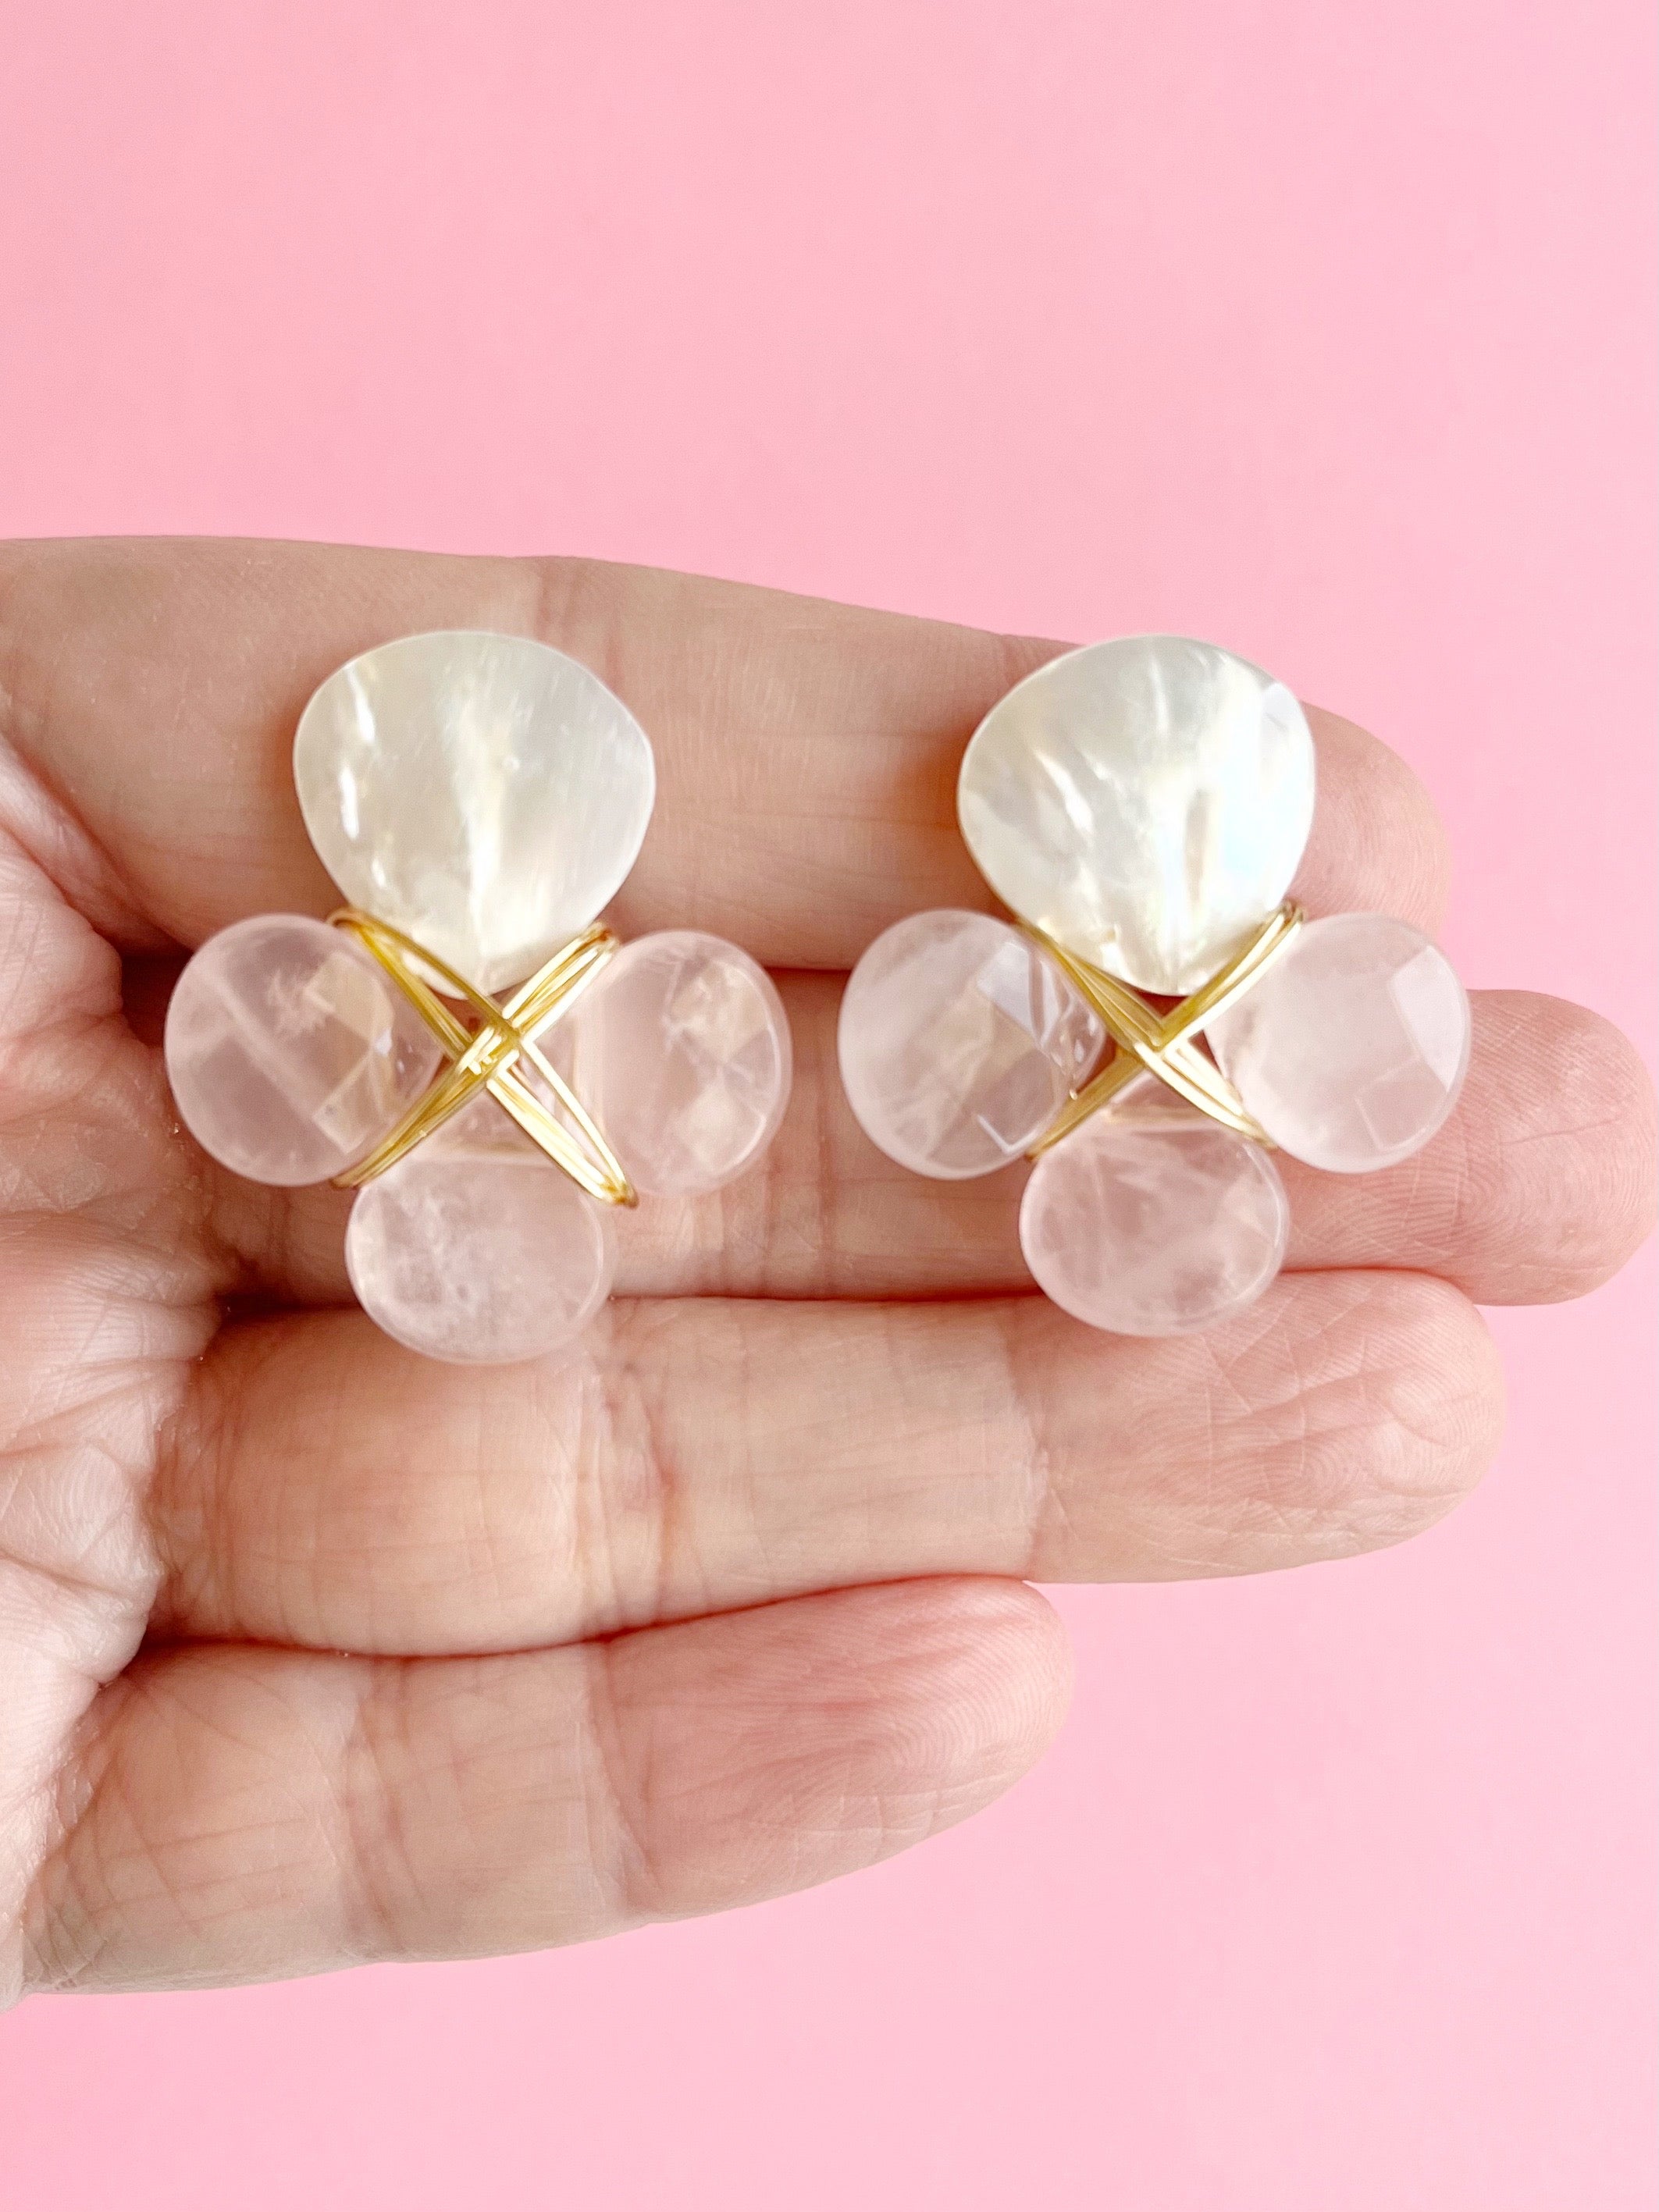 rose quartz and mother of pearl earrings wrapped in gold wire displayed on hand